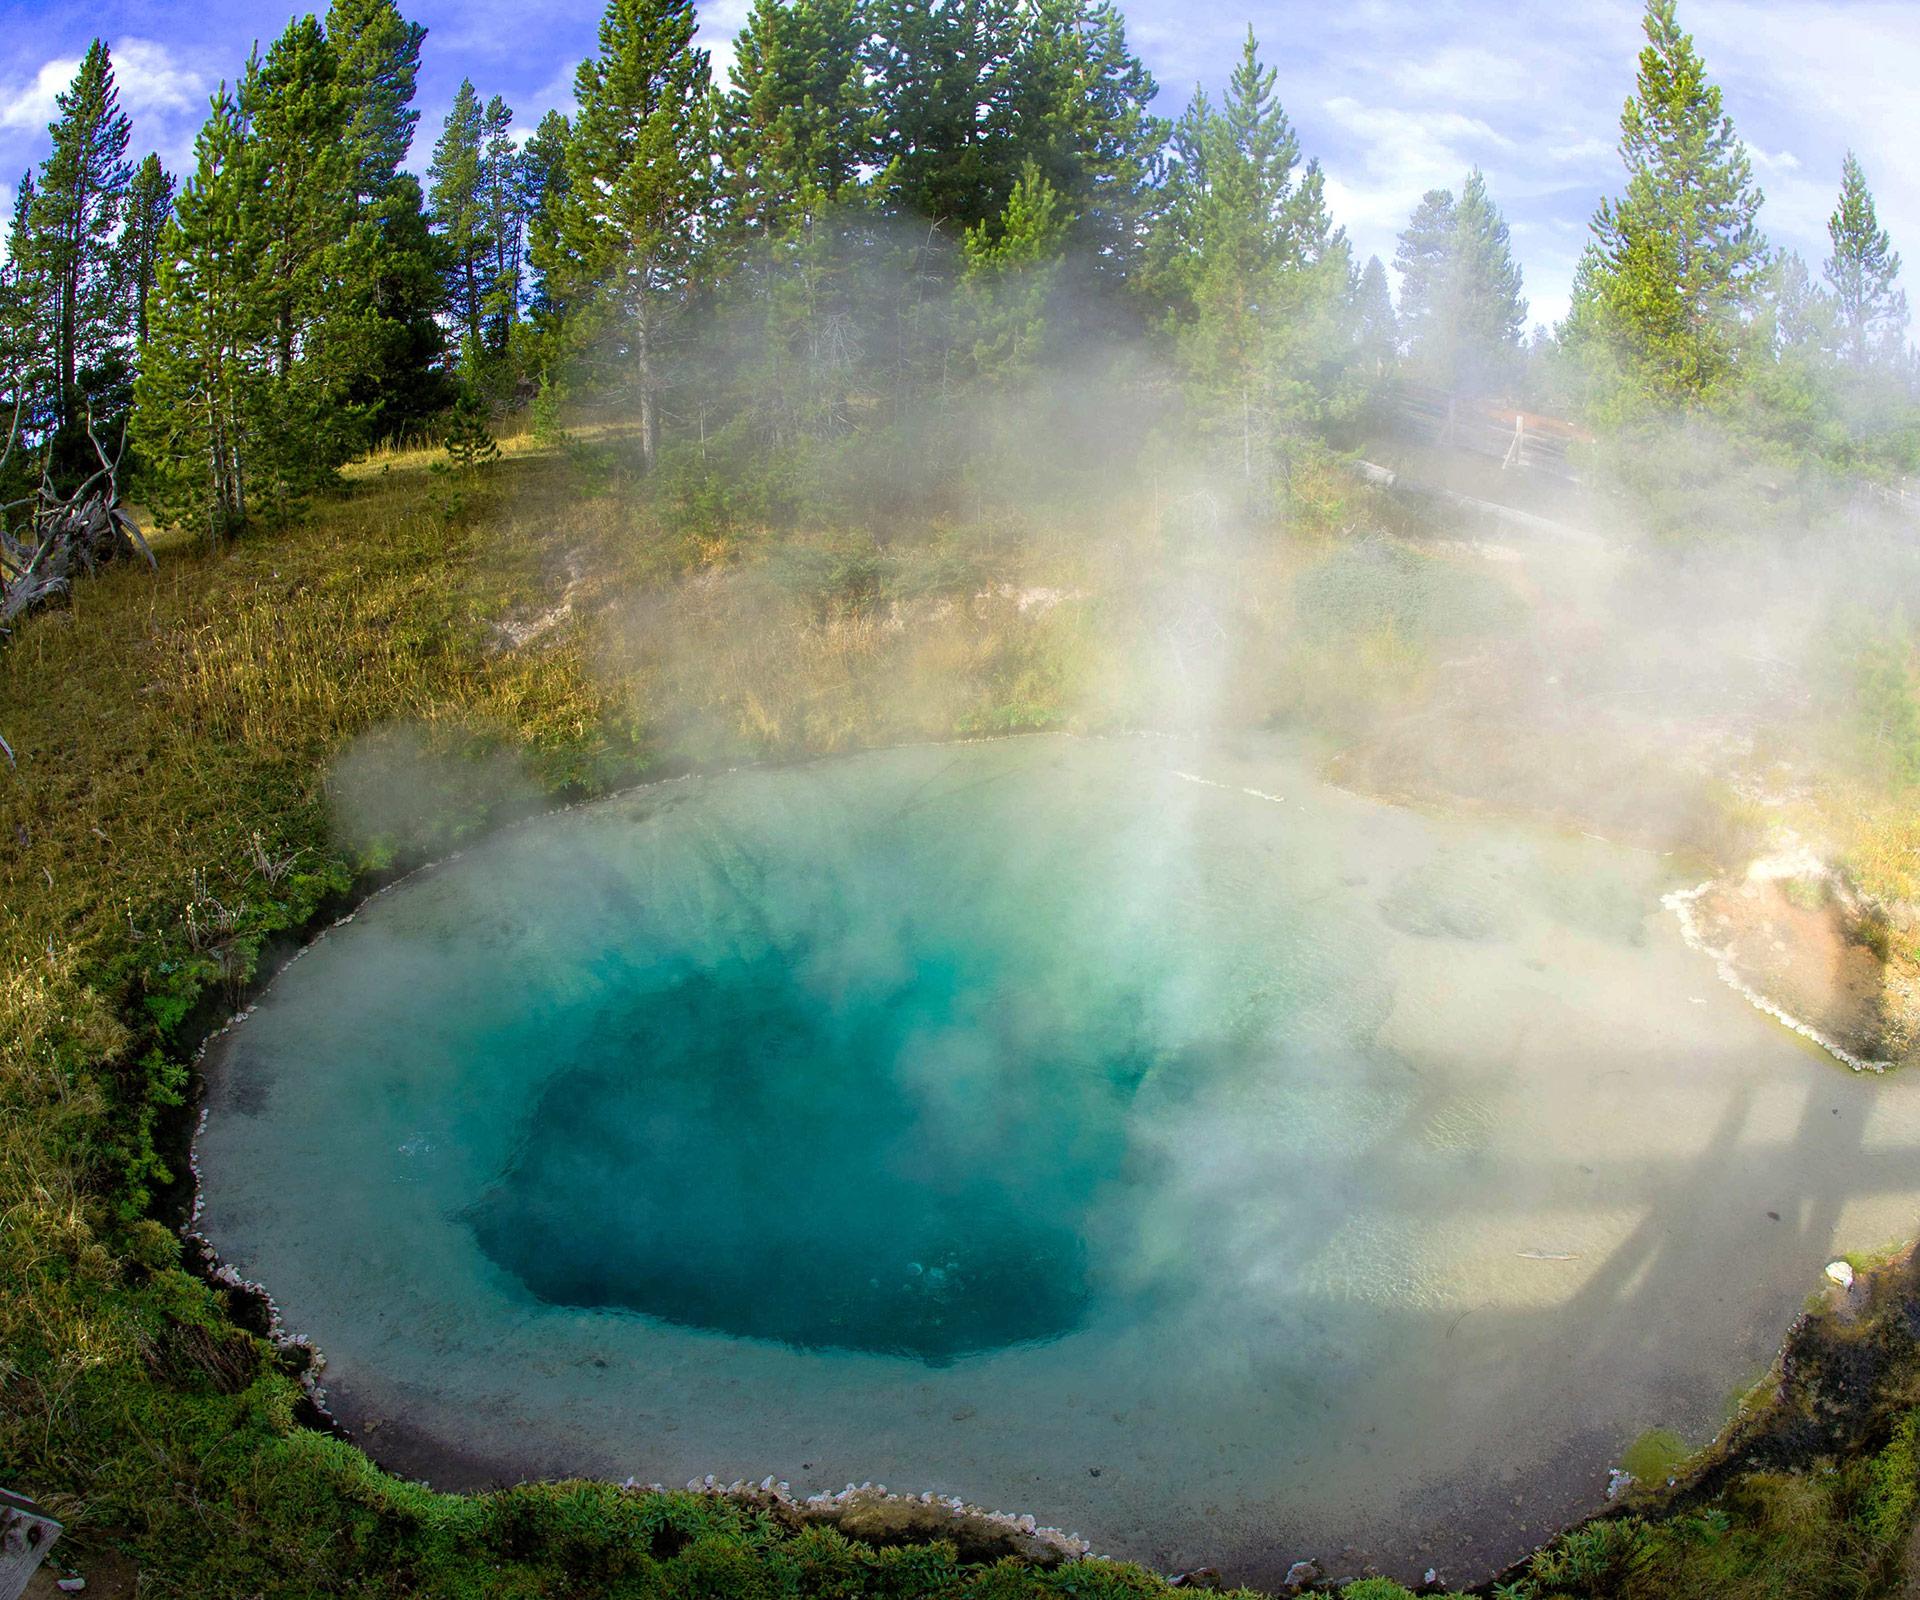 Man dissolves after he mistakes acid pool for hot spring